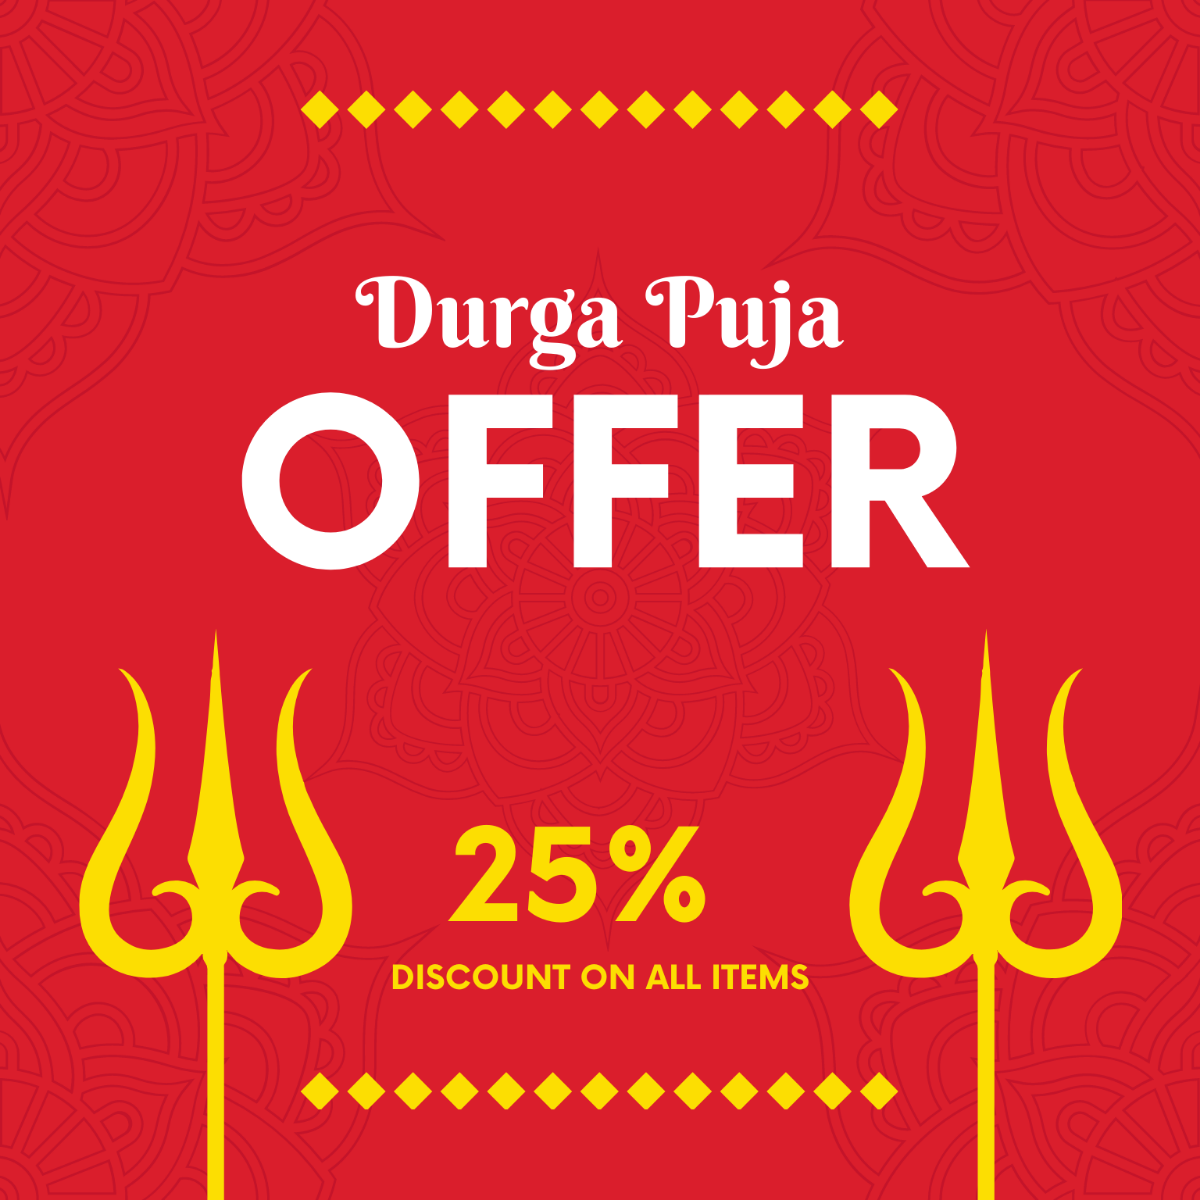 Durga Puja Offer Poster Template